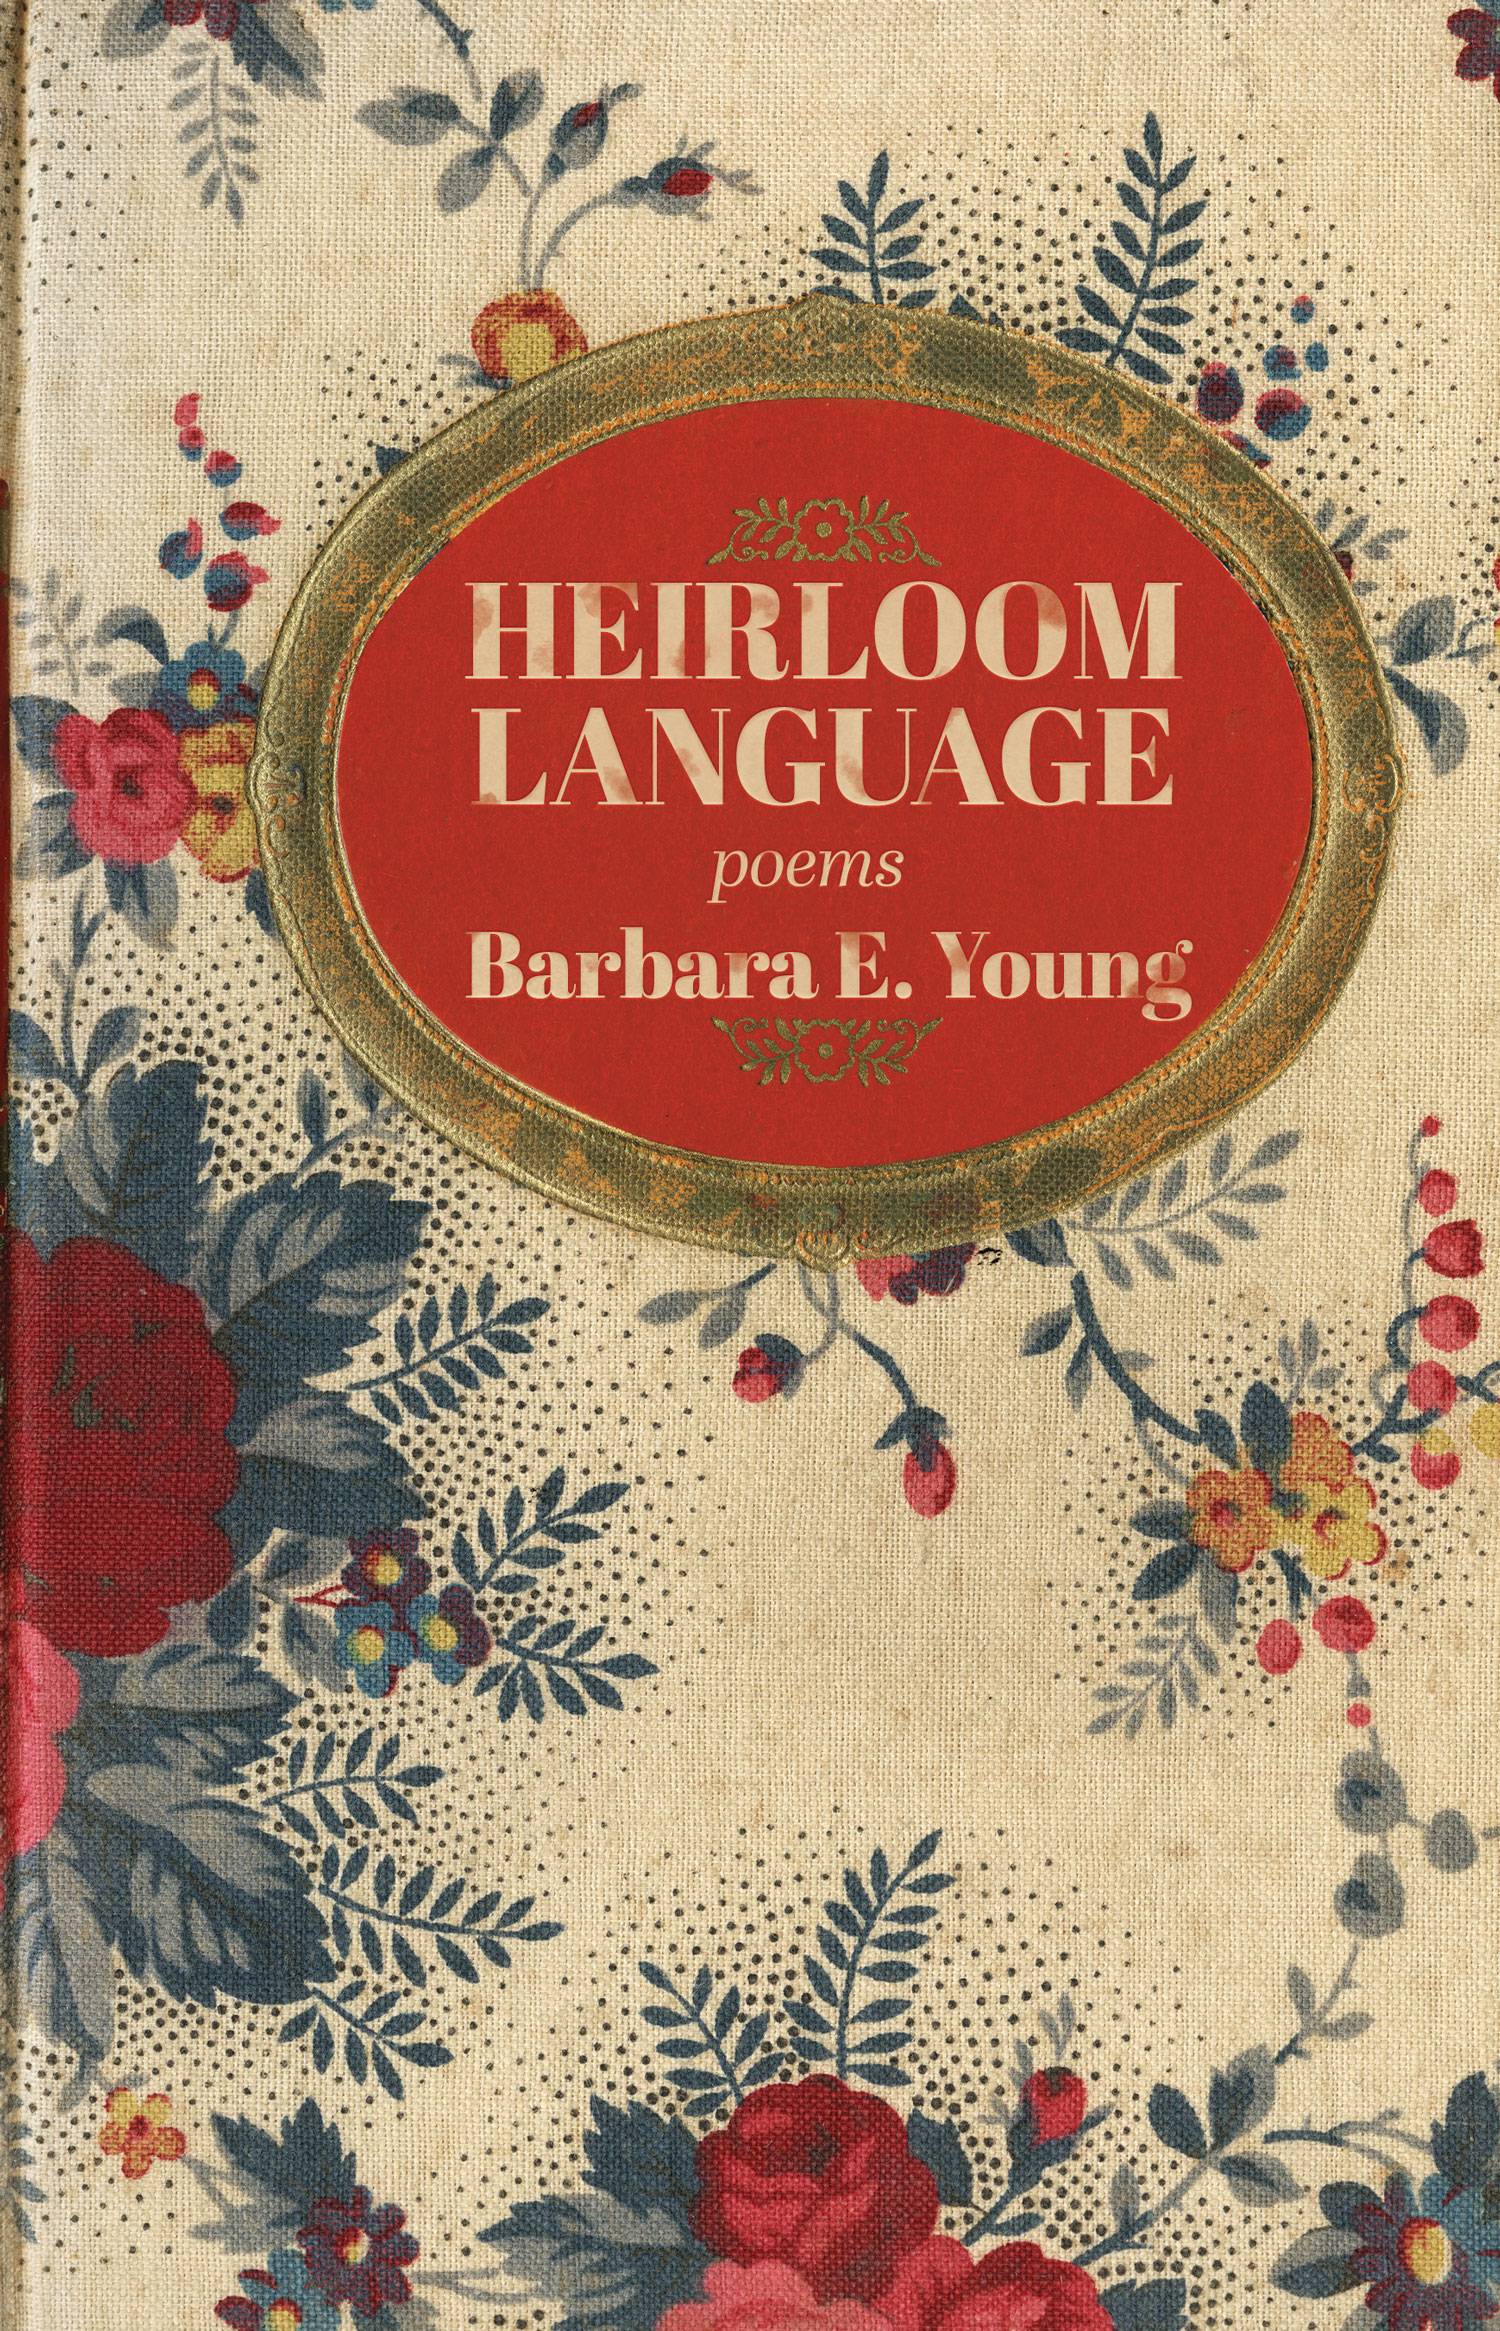 Heirloom Language: Poems by Barbare E. Young. Cover shows an old-style cloth book cover with a floral pattern and a red medallion behind the title and author name.